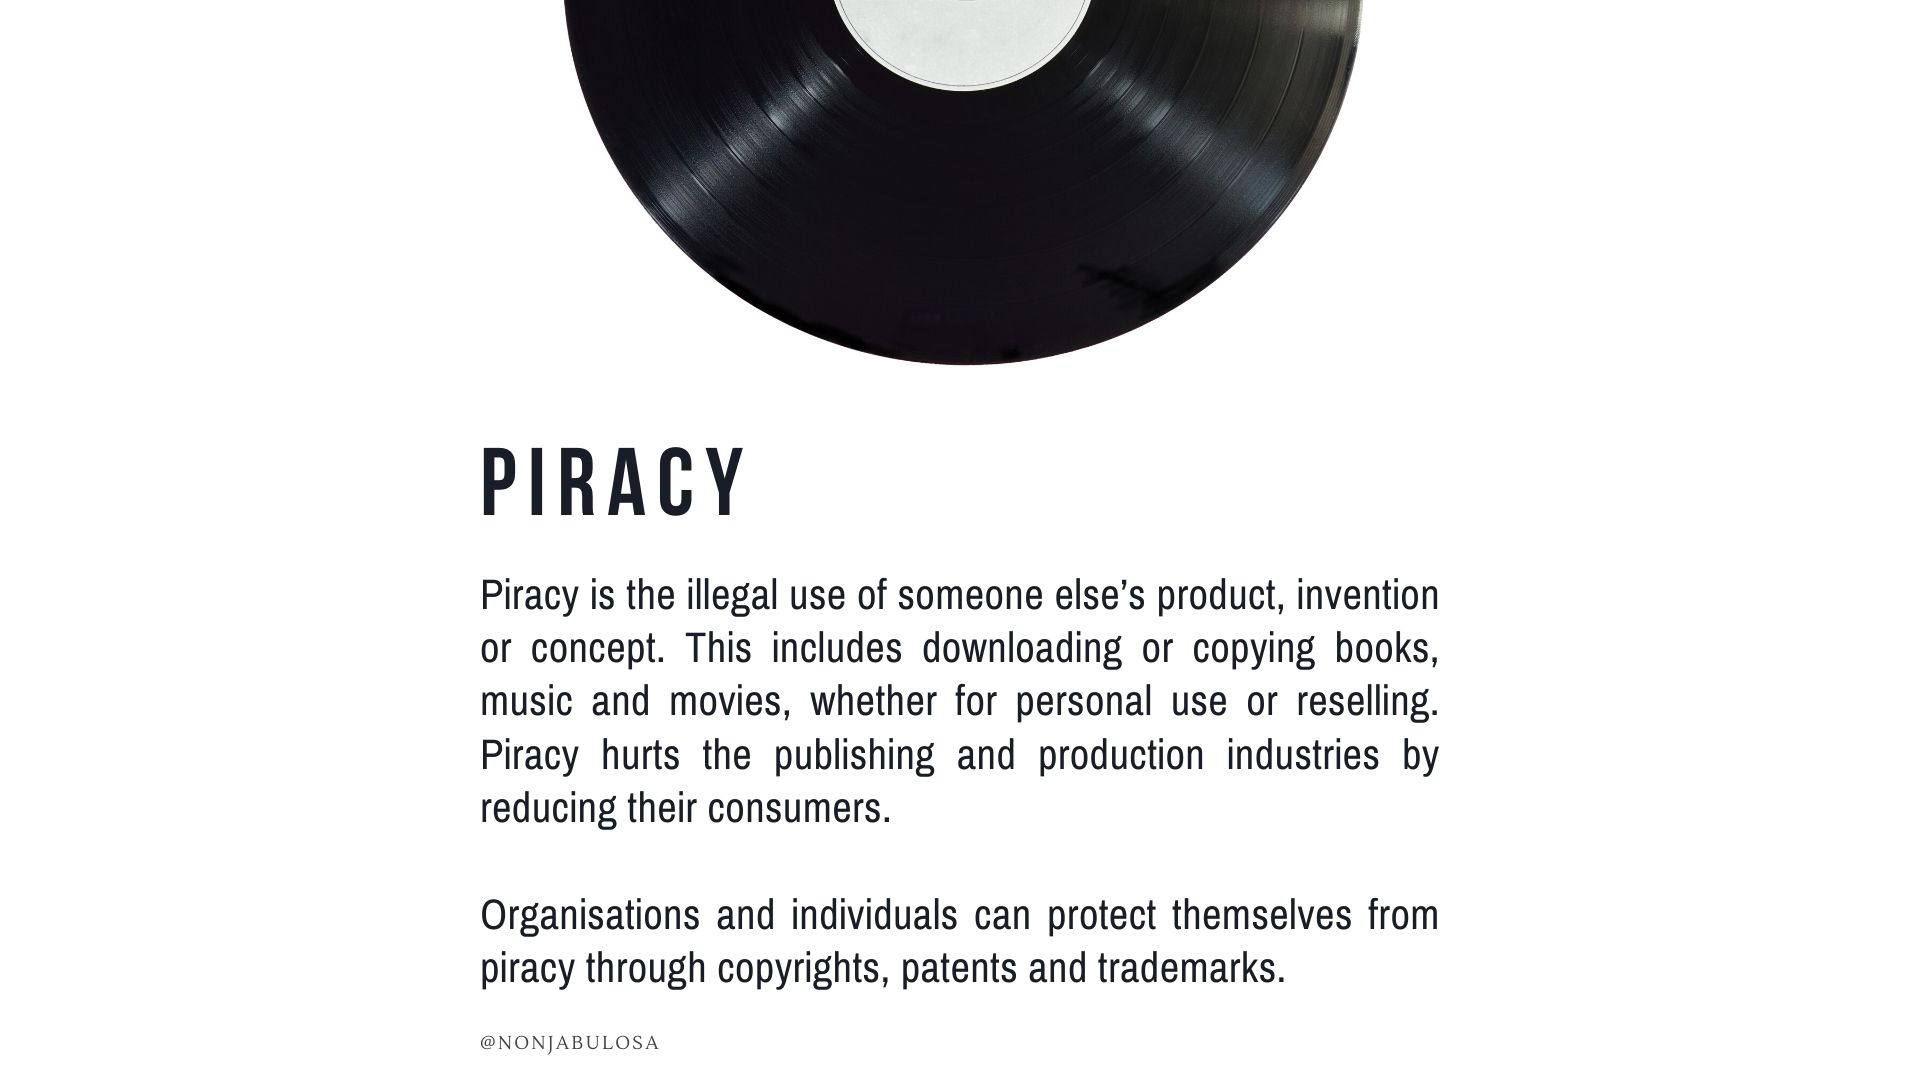 List of South African Contemporary Socio-Economic Issues - Definition and explanation of piracy